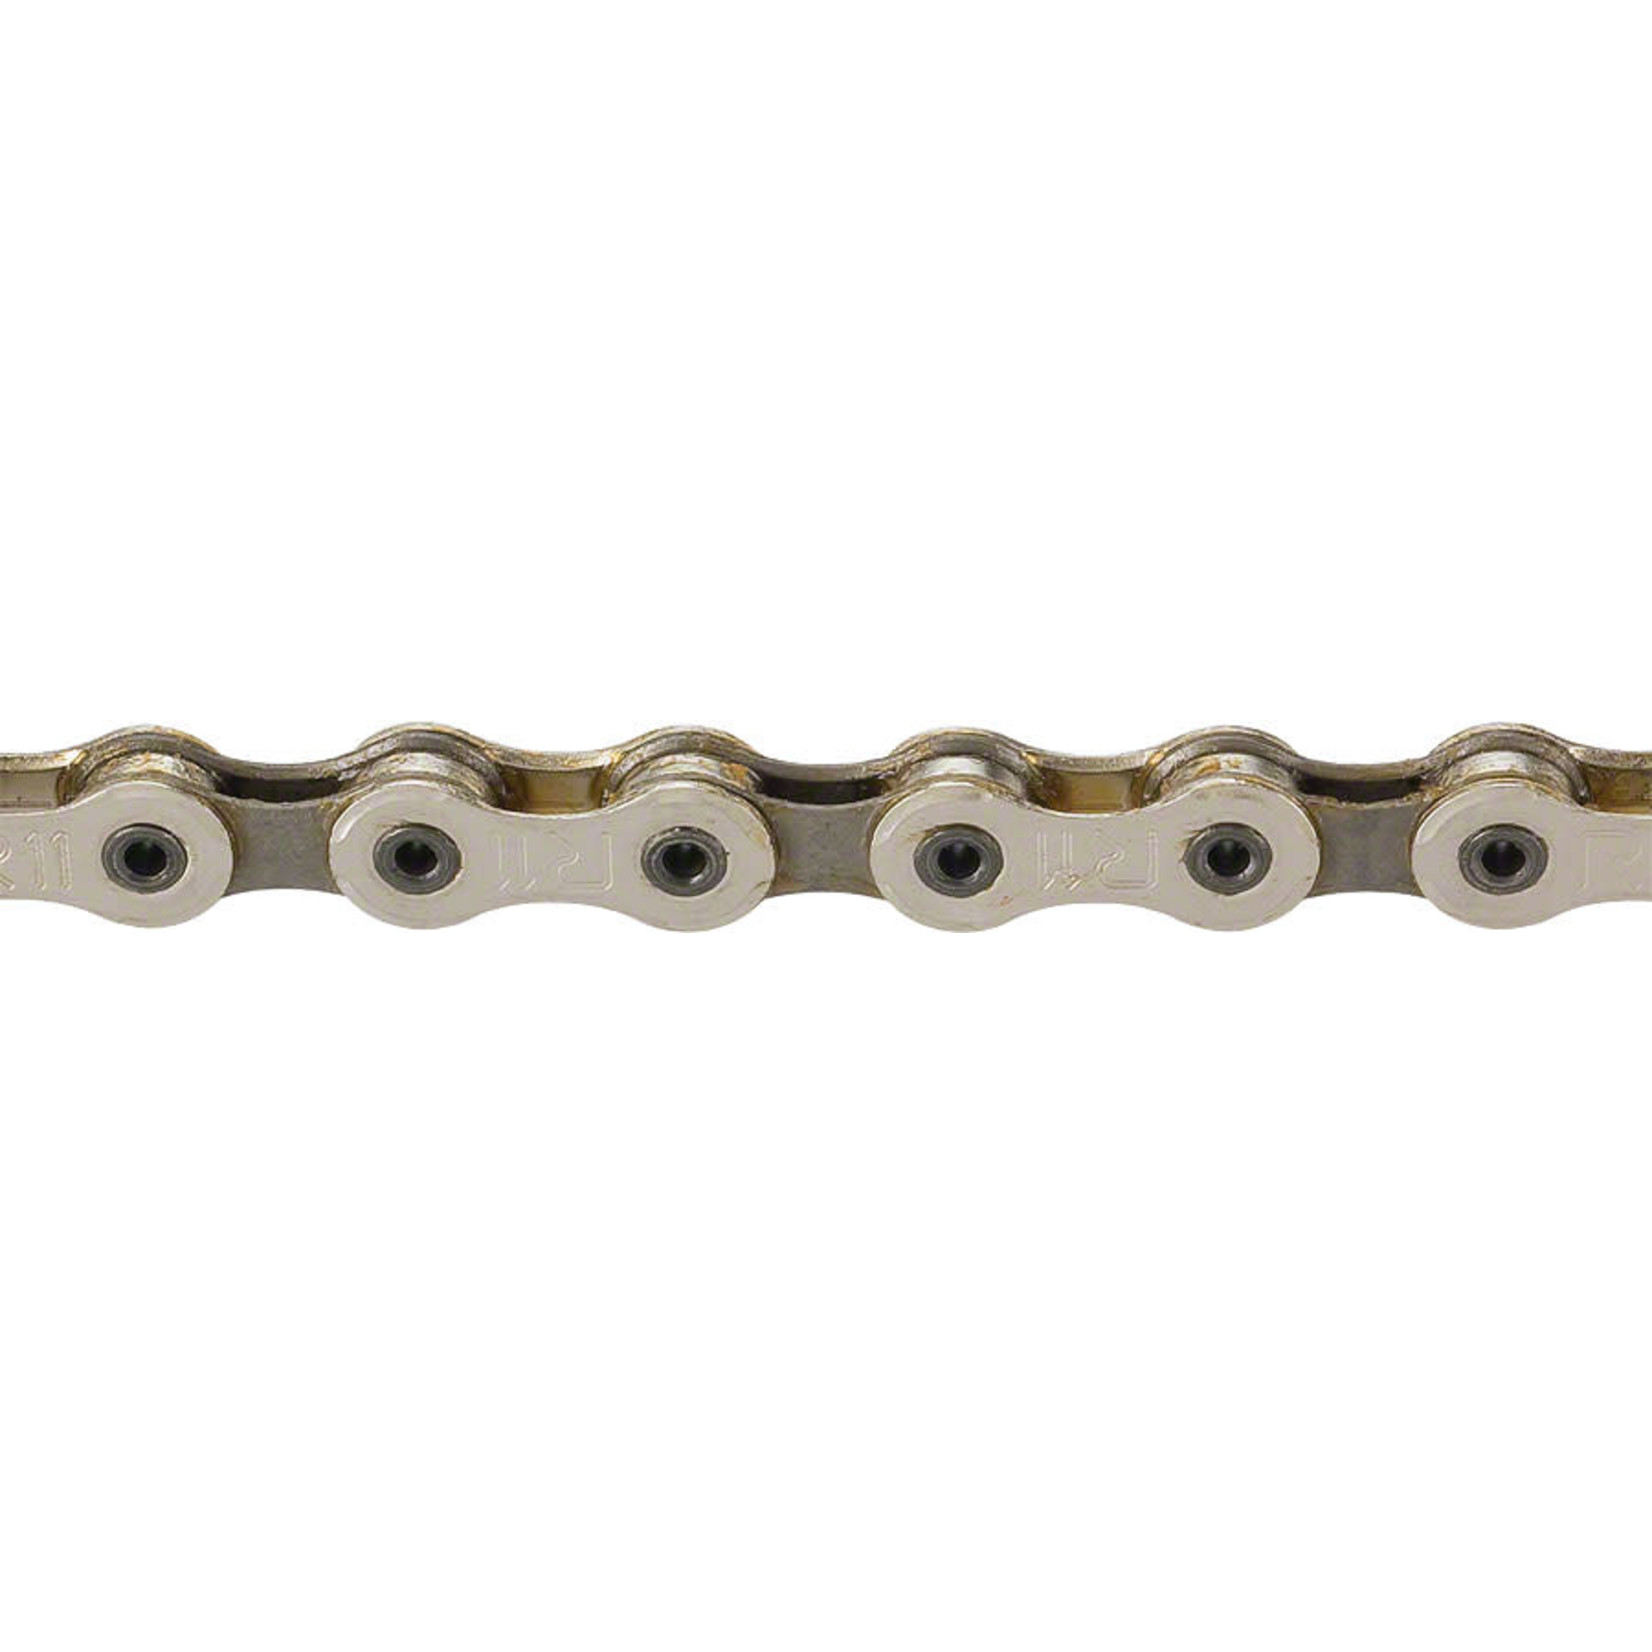 Campagnolo Record Chain - 11-Speed, 114 Links, Silver